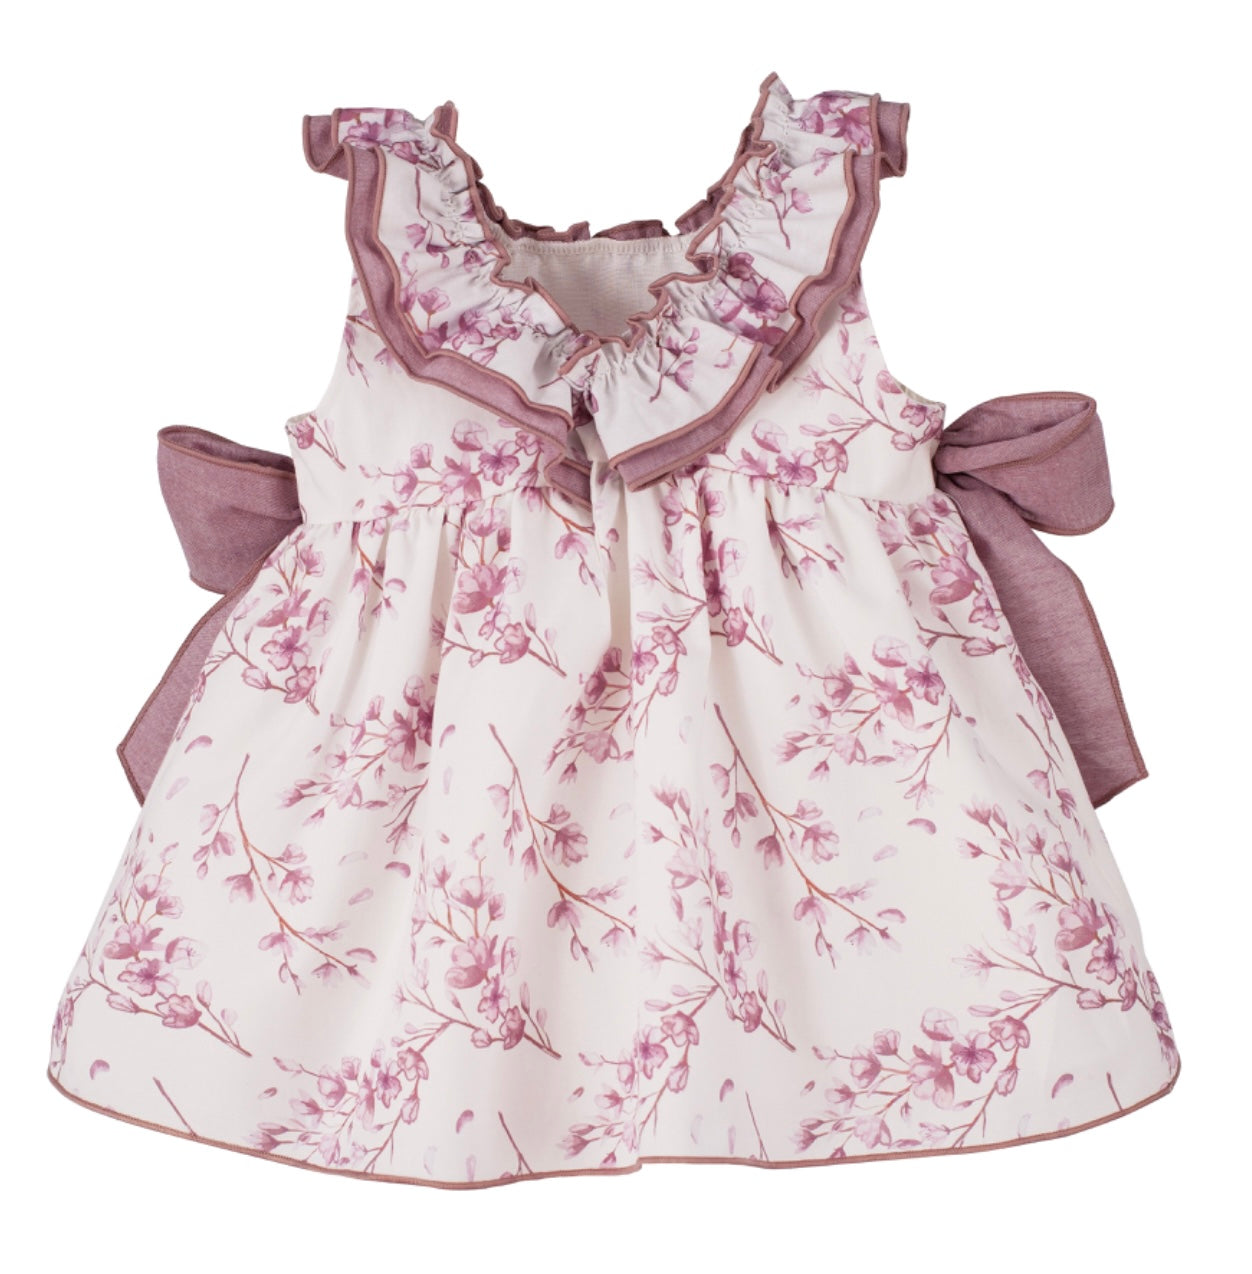 Calamaro Girls Dusty pink floral bow dress